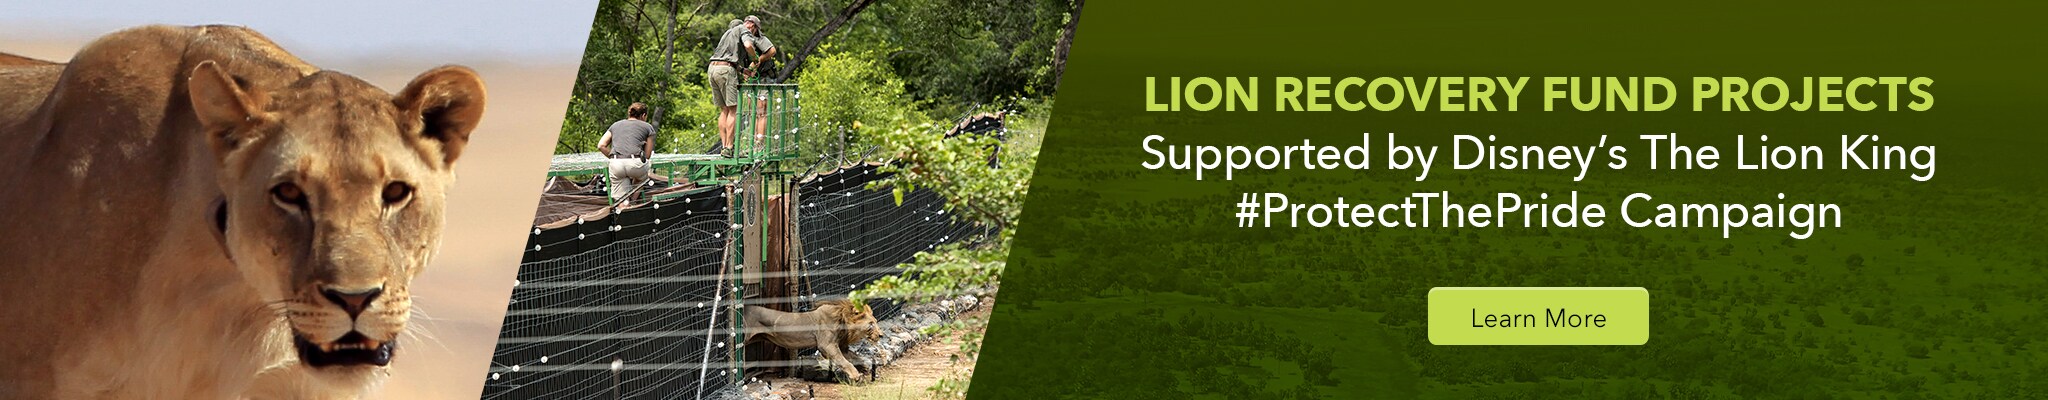 Lion Recovery Fund Projects. Supported by Disney's The Lion King. #ProtectThePride Campaign